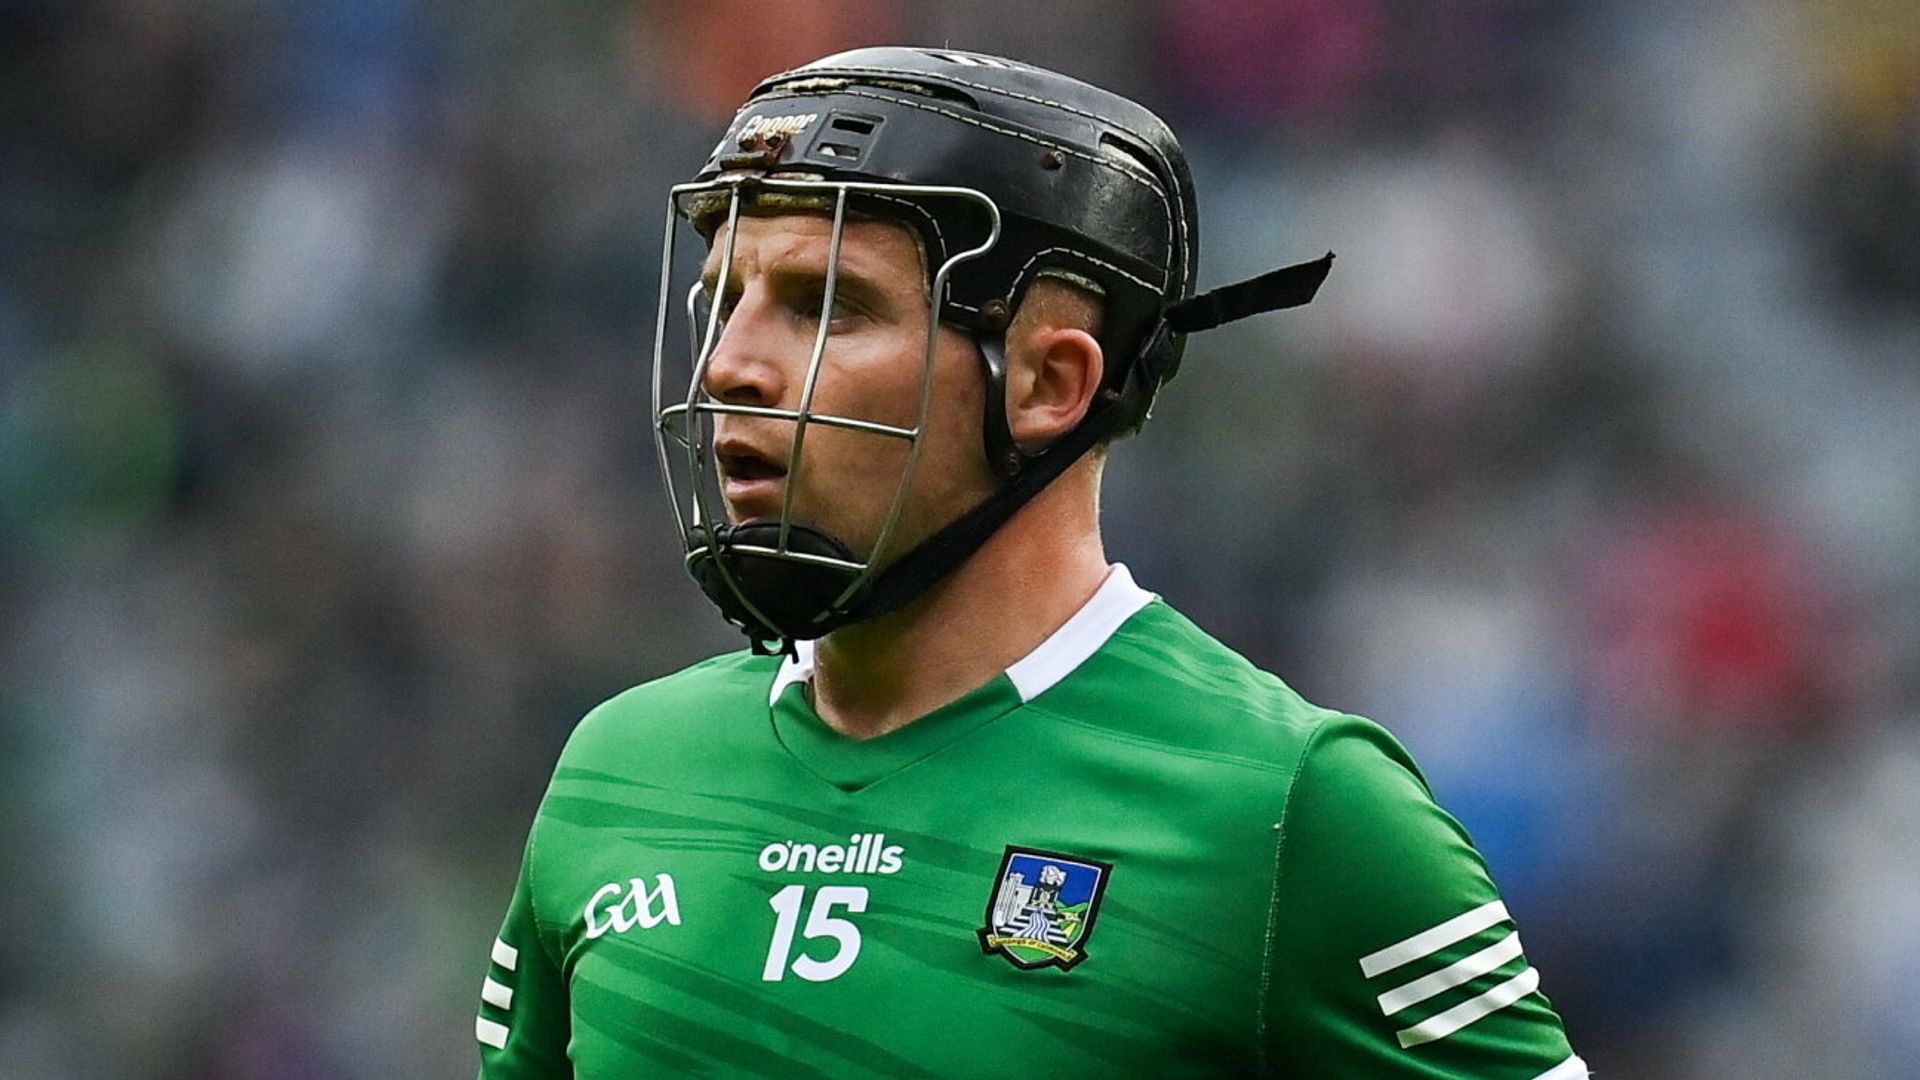 Casey cleared to play in All-Ireland final